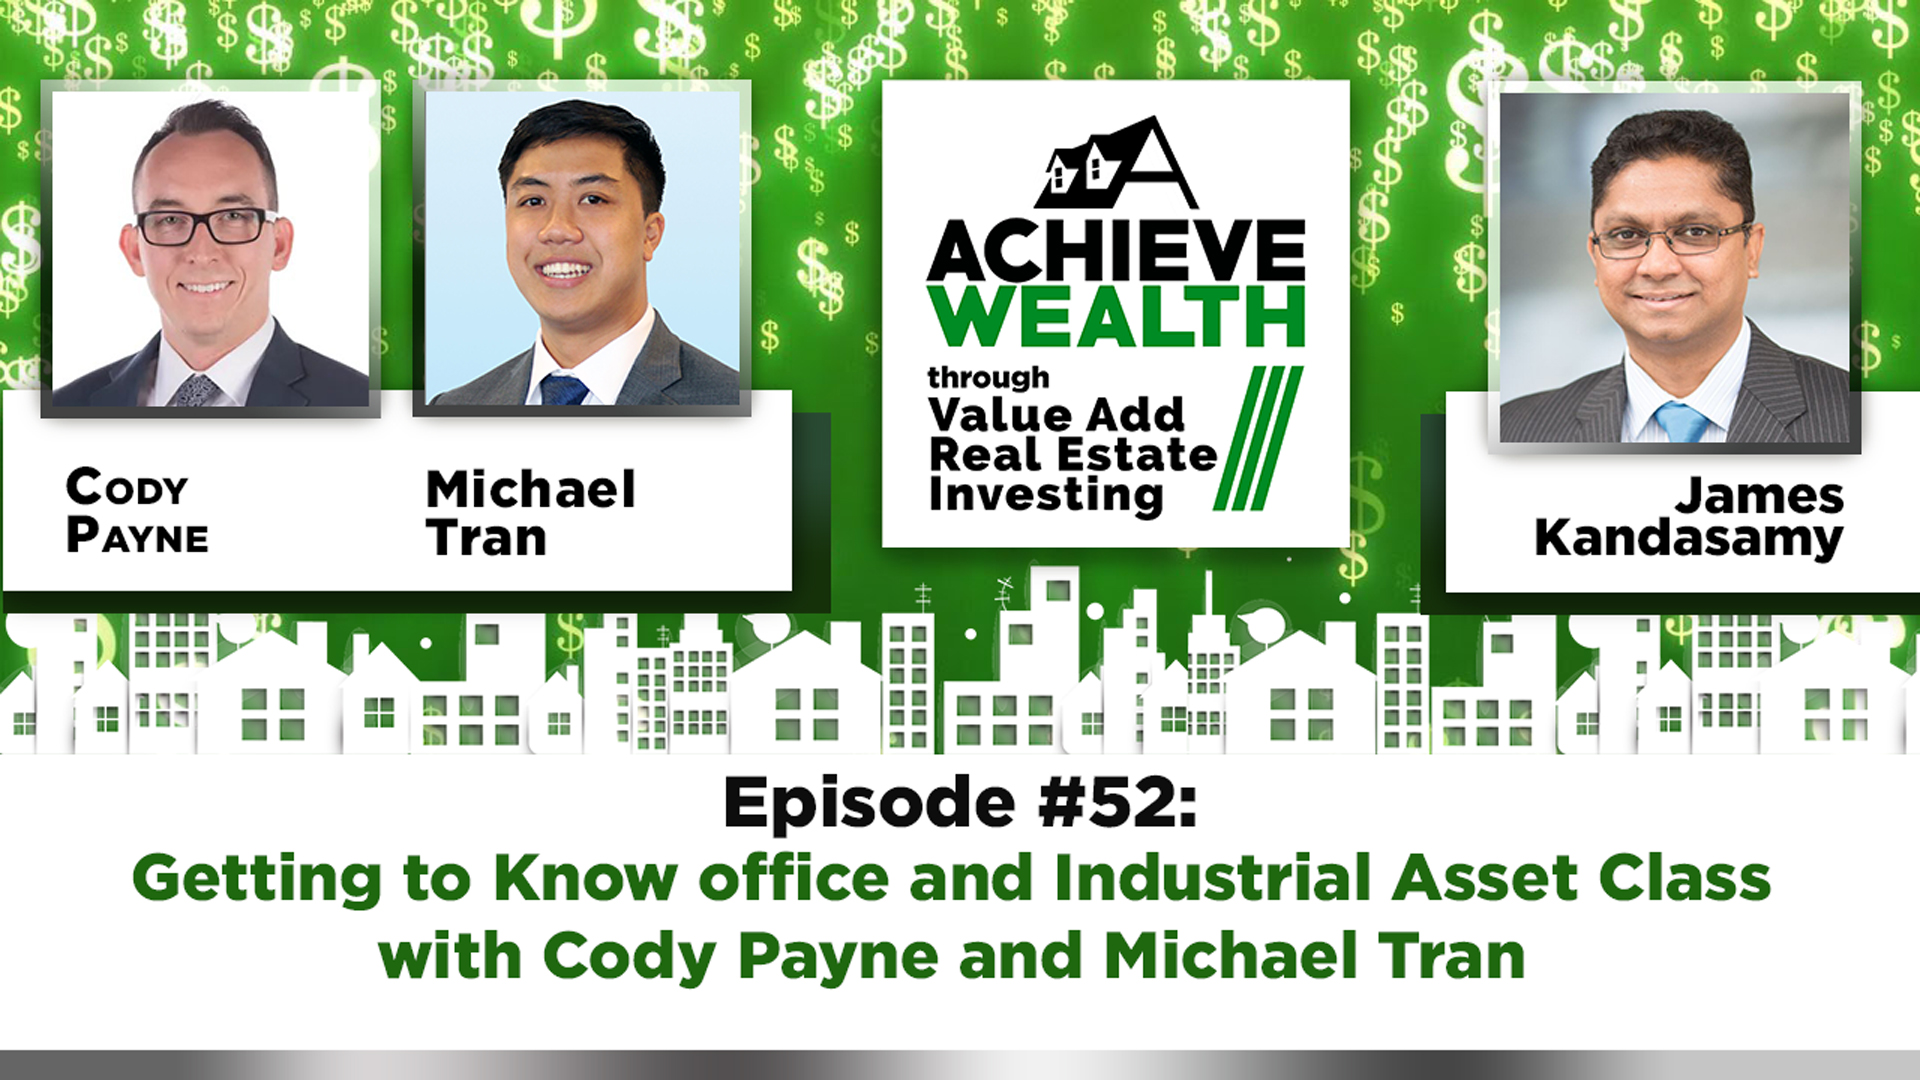 Ep#52 Getting to Know office and Industrial Asset Class with Cody Payne and Michael Tran